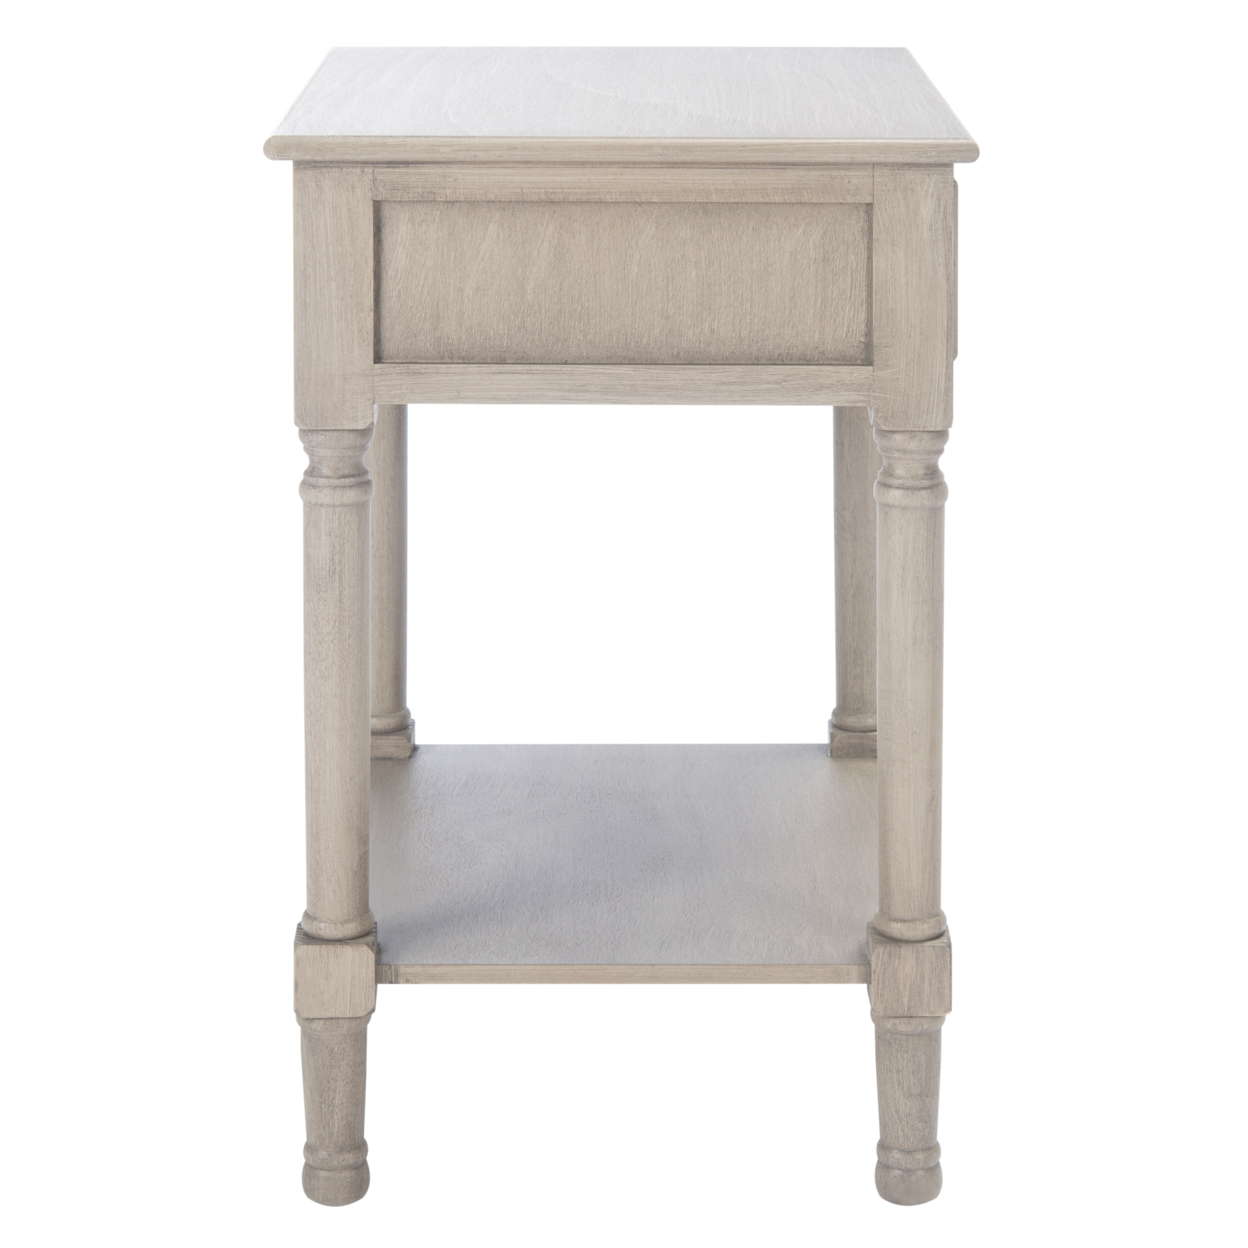 SAFAVIEH Haines 1-Drawer Accent Table Greige